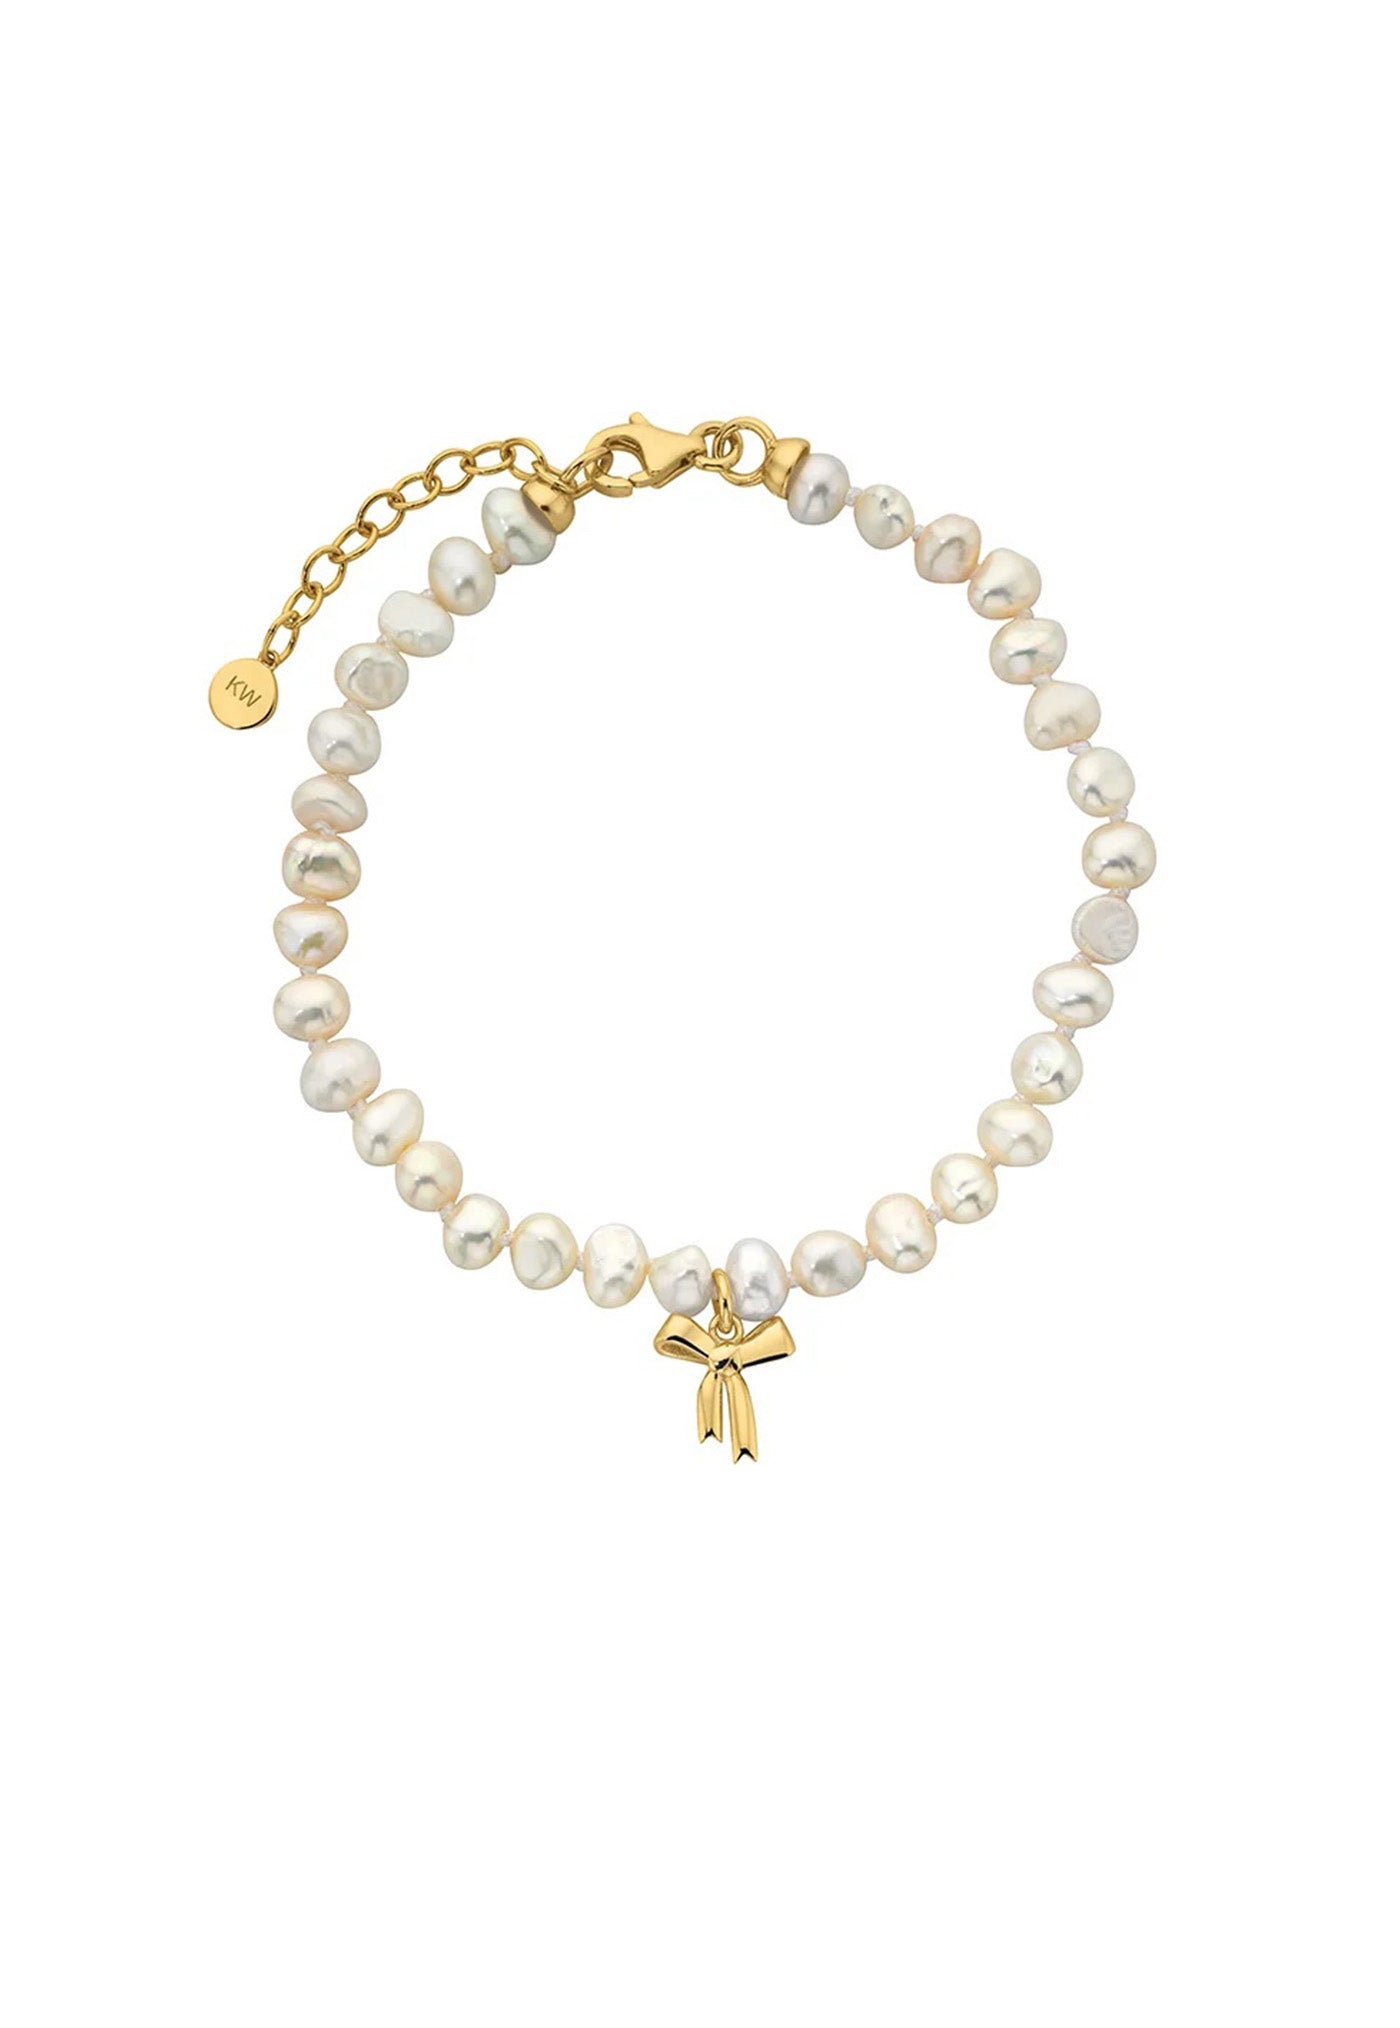 Petite Bow w/ Pearls Bracelet - Gold sold by Angel Divine